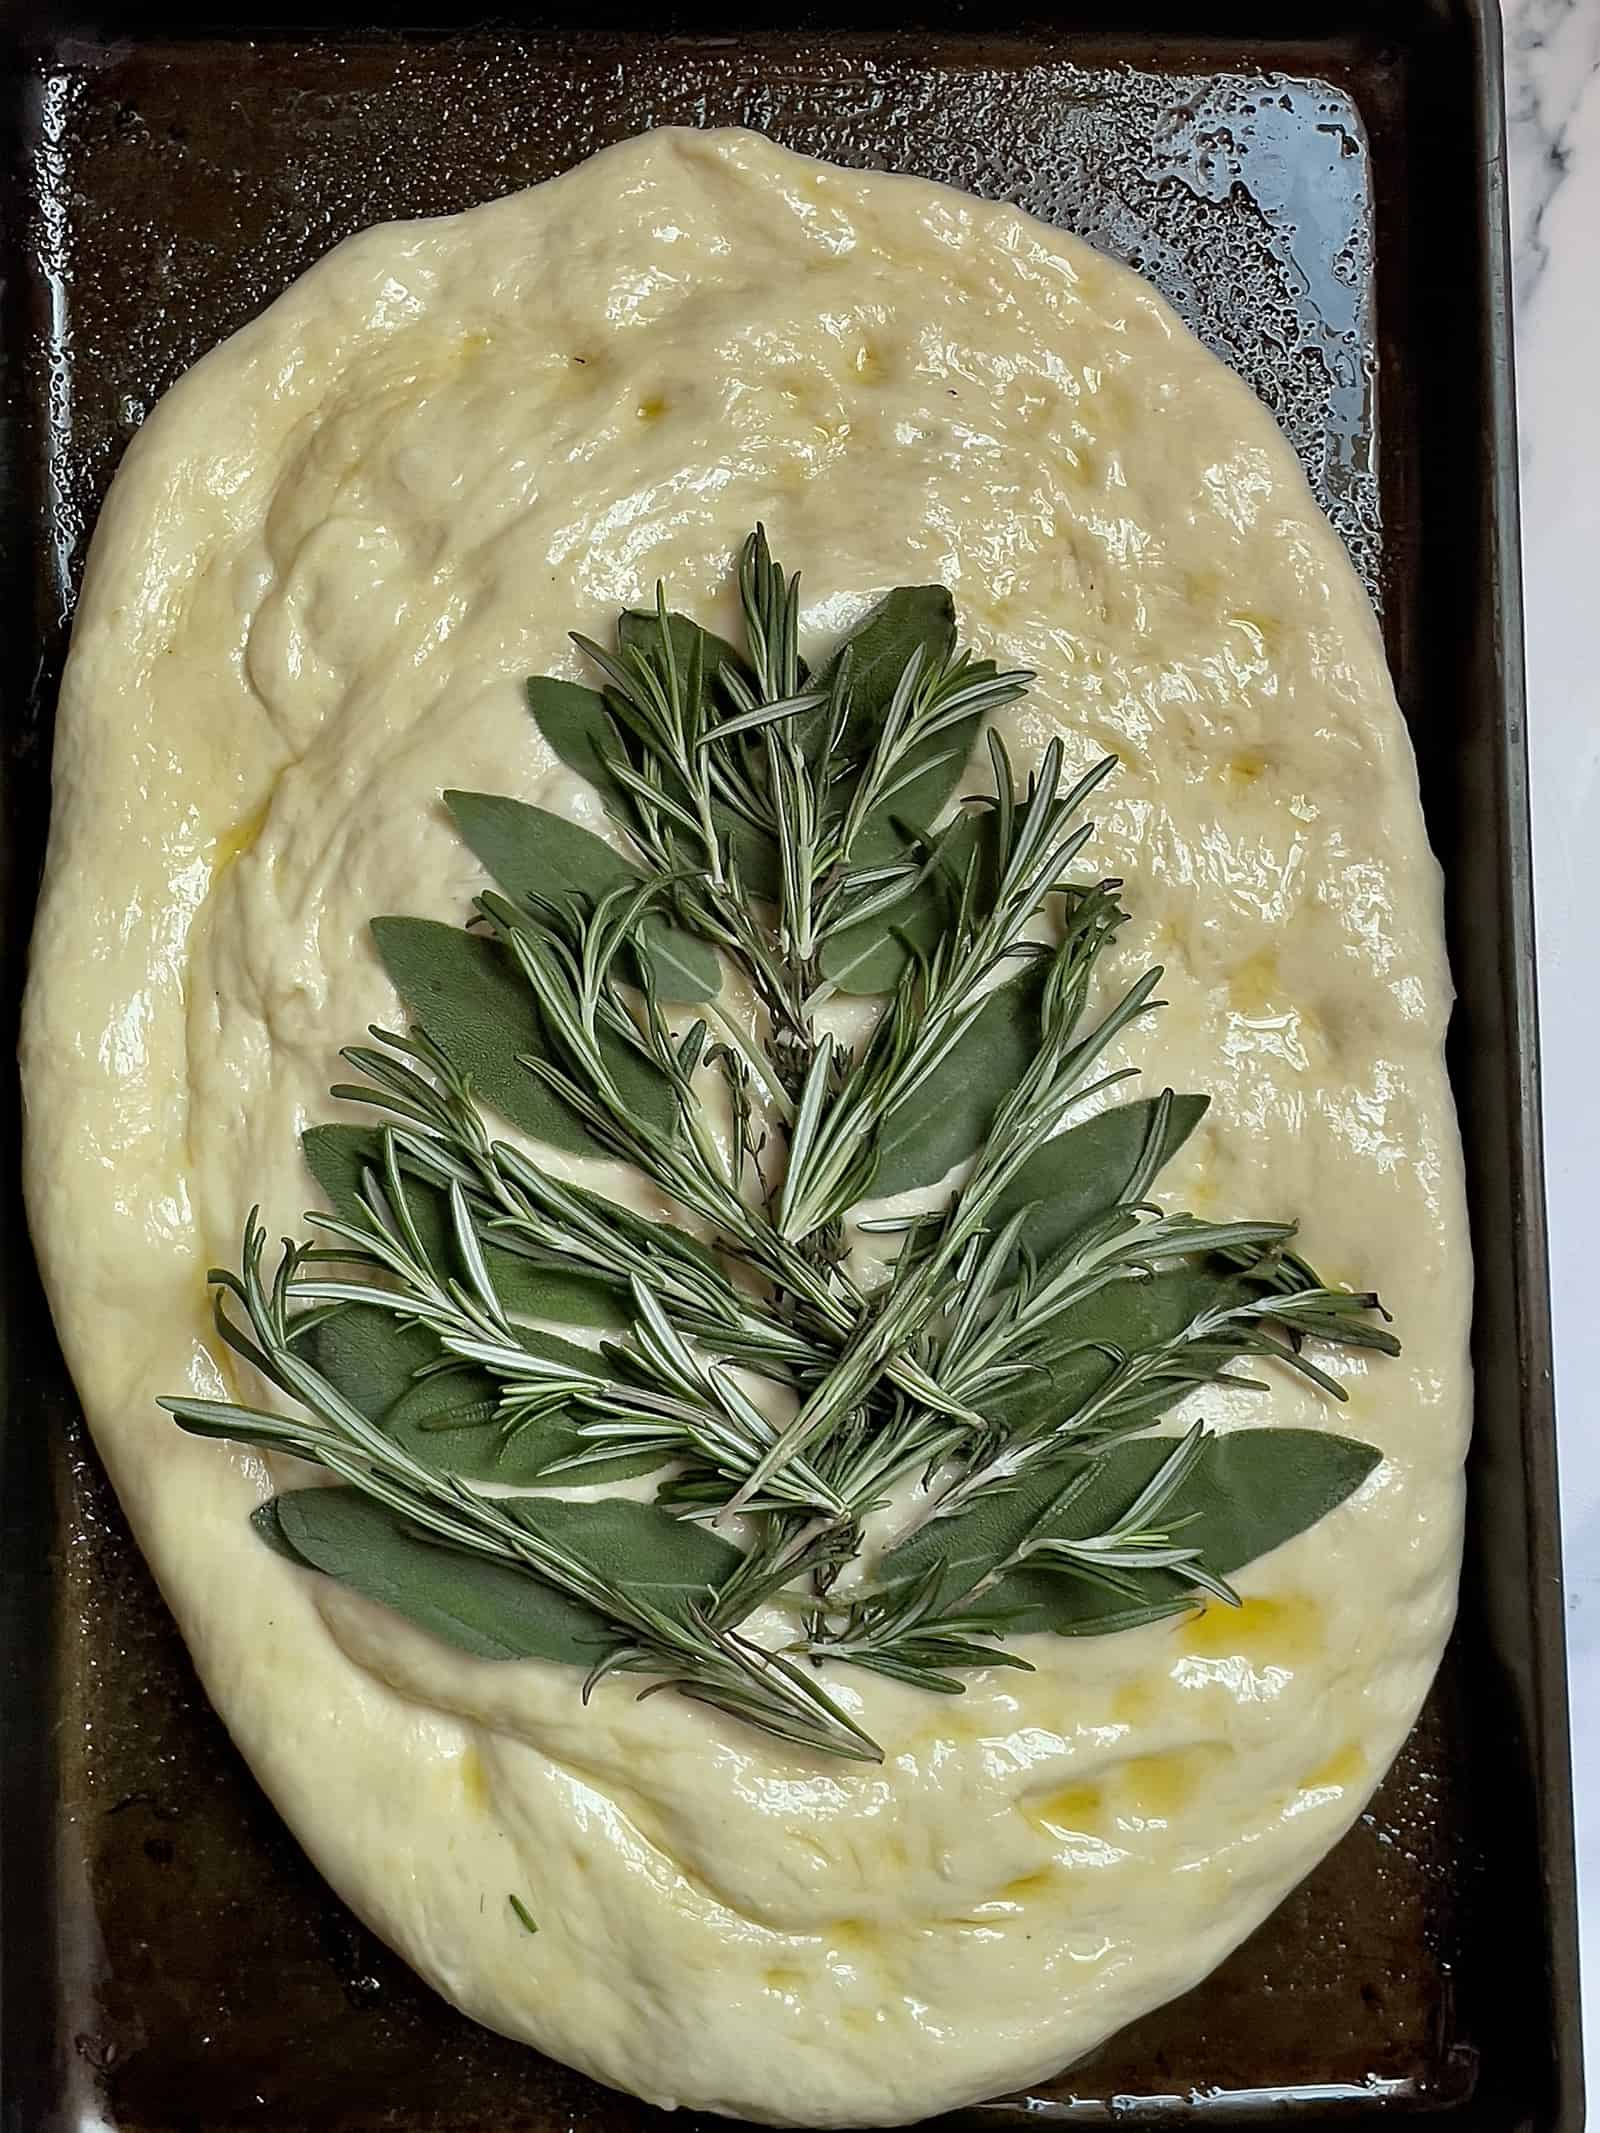 sage leaves and rosemary spread out around a piece of thyme on focaccia bread